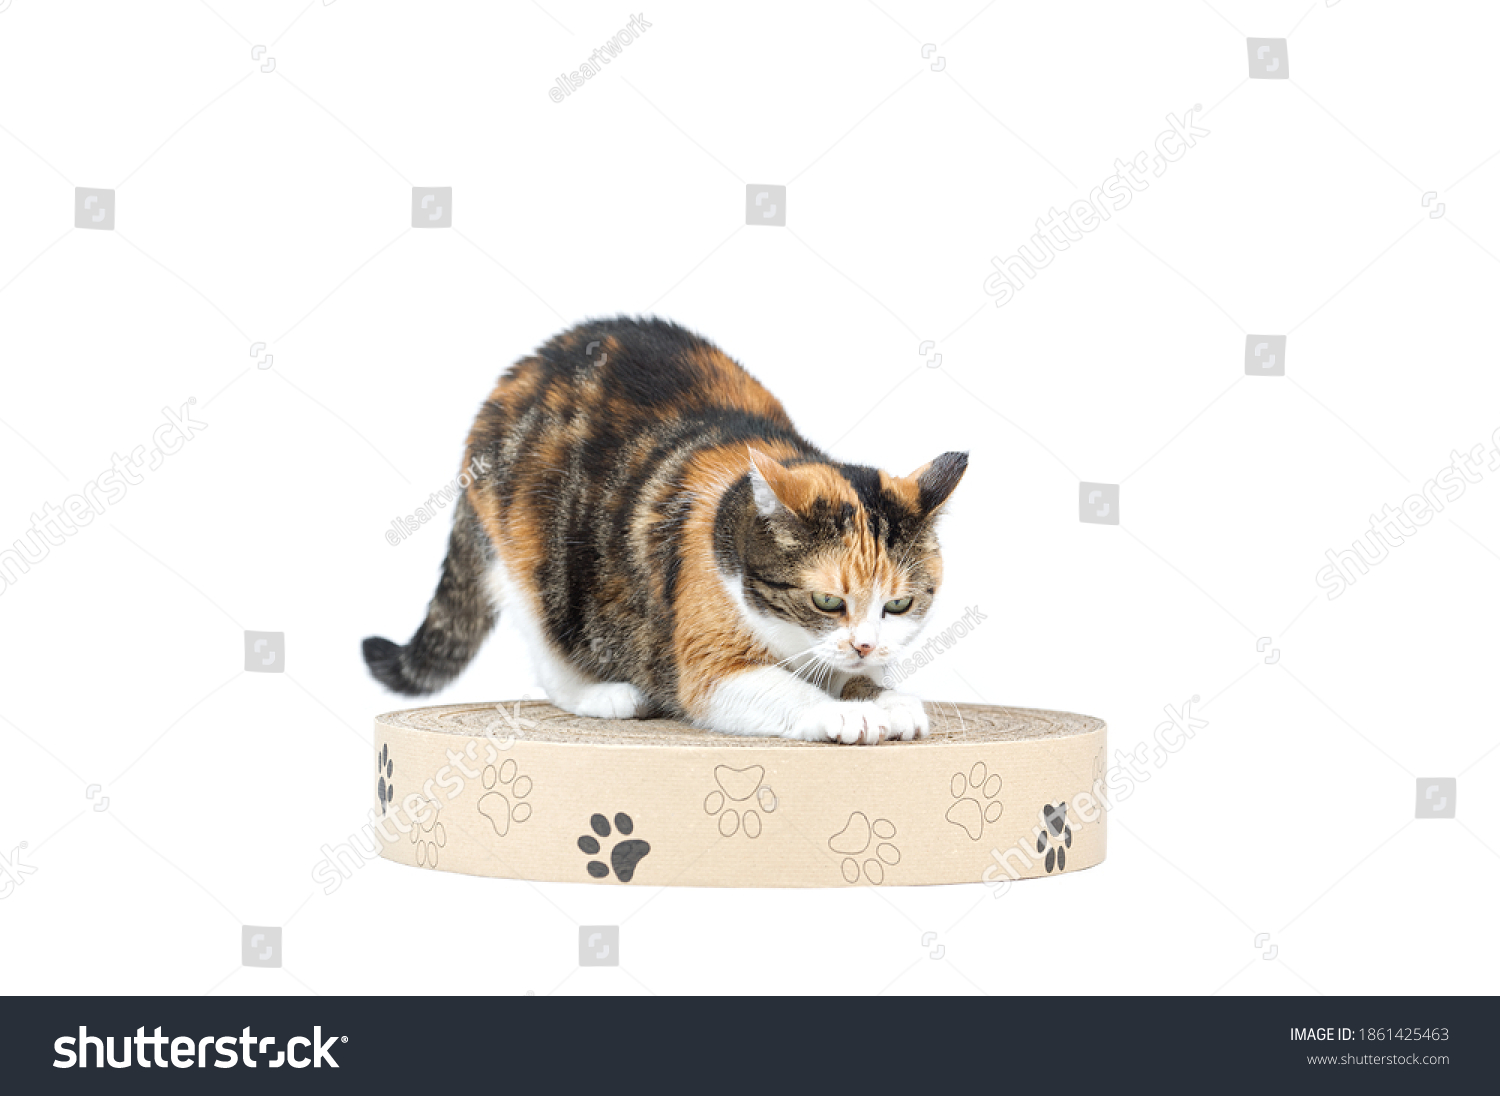 Adul three coloured tabby cat scratching paper cat scratcher with paws from recyclable cardboard isolated on white background #1861425463